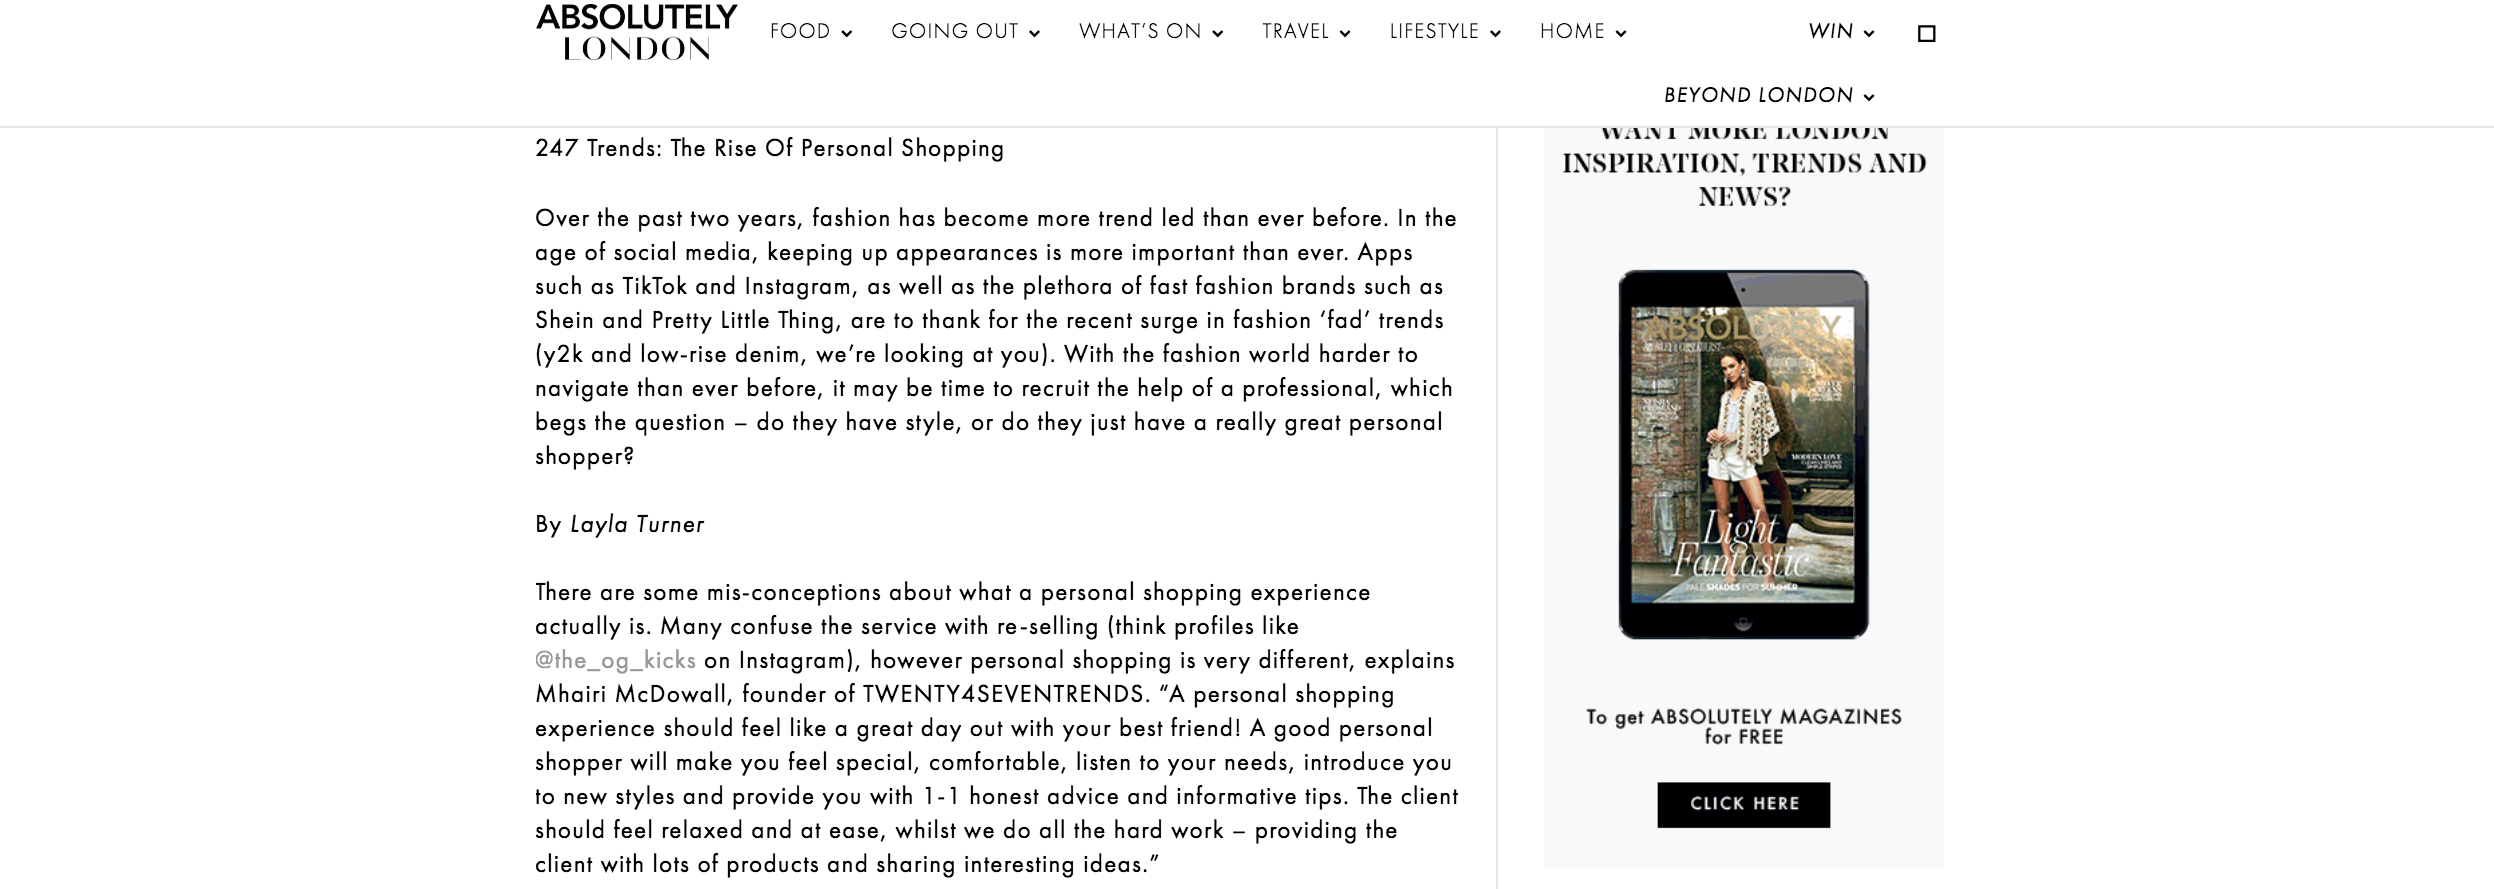 FireShot Capture 669 - 247TRENDS_ The Rise Of Personal Shopping - Absolutely.London_ - absolutely.london.png